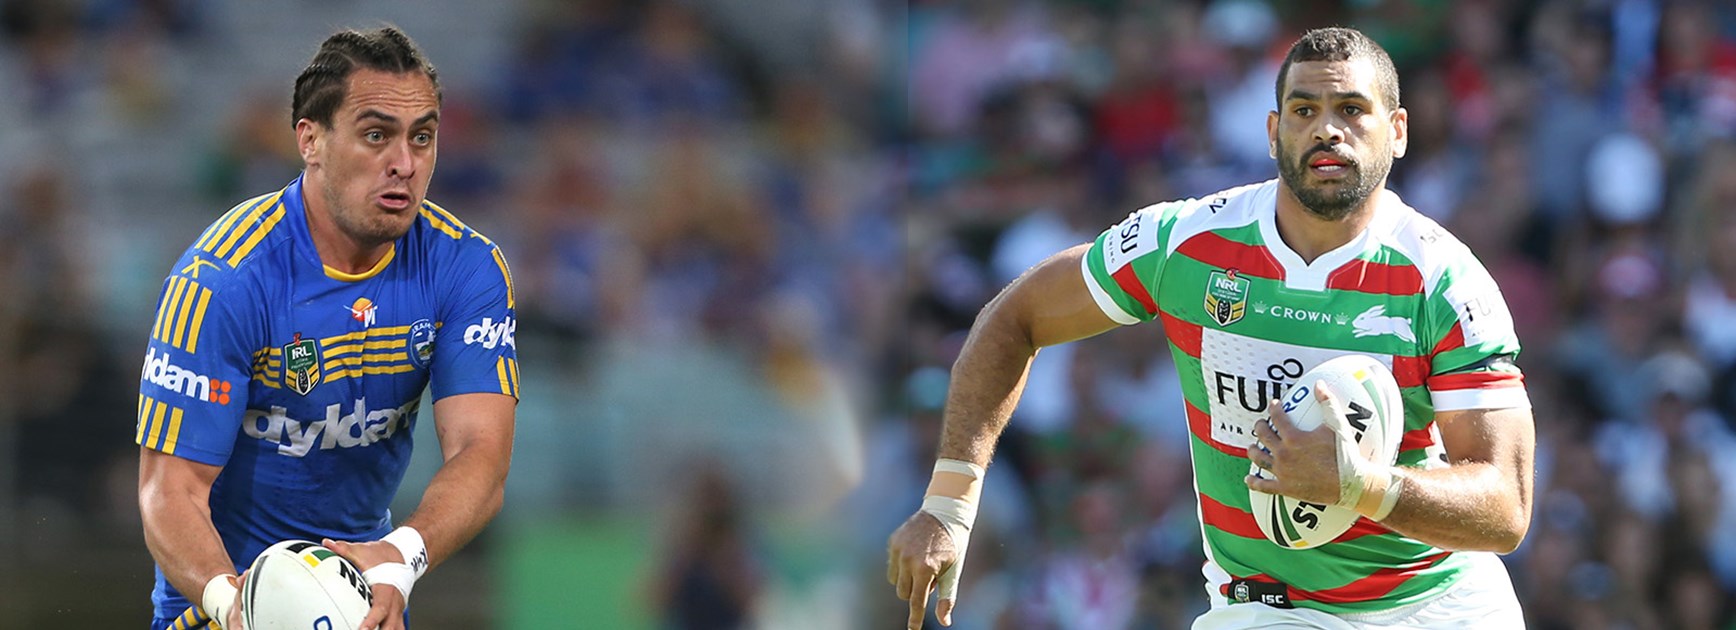 They are two of the biggest five-eighths you are ever likely to see when Brad Takairangi takes on Greg Inglis.